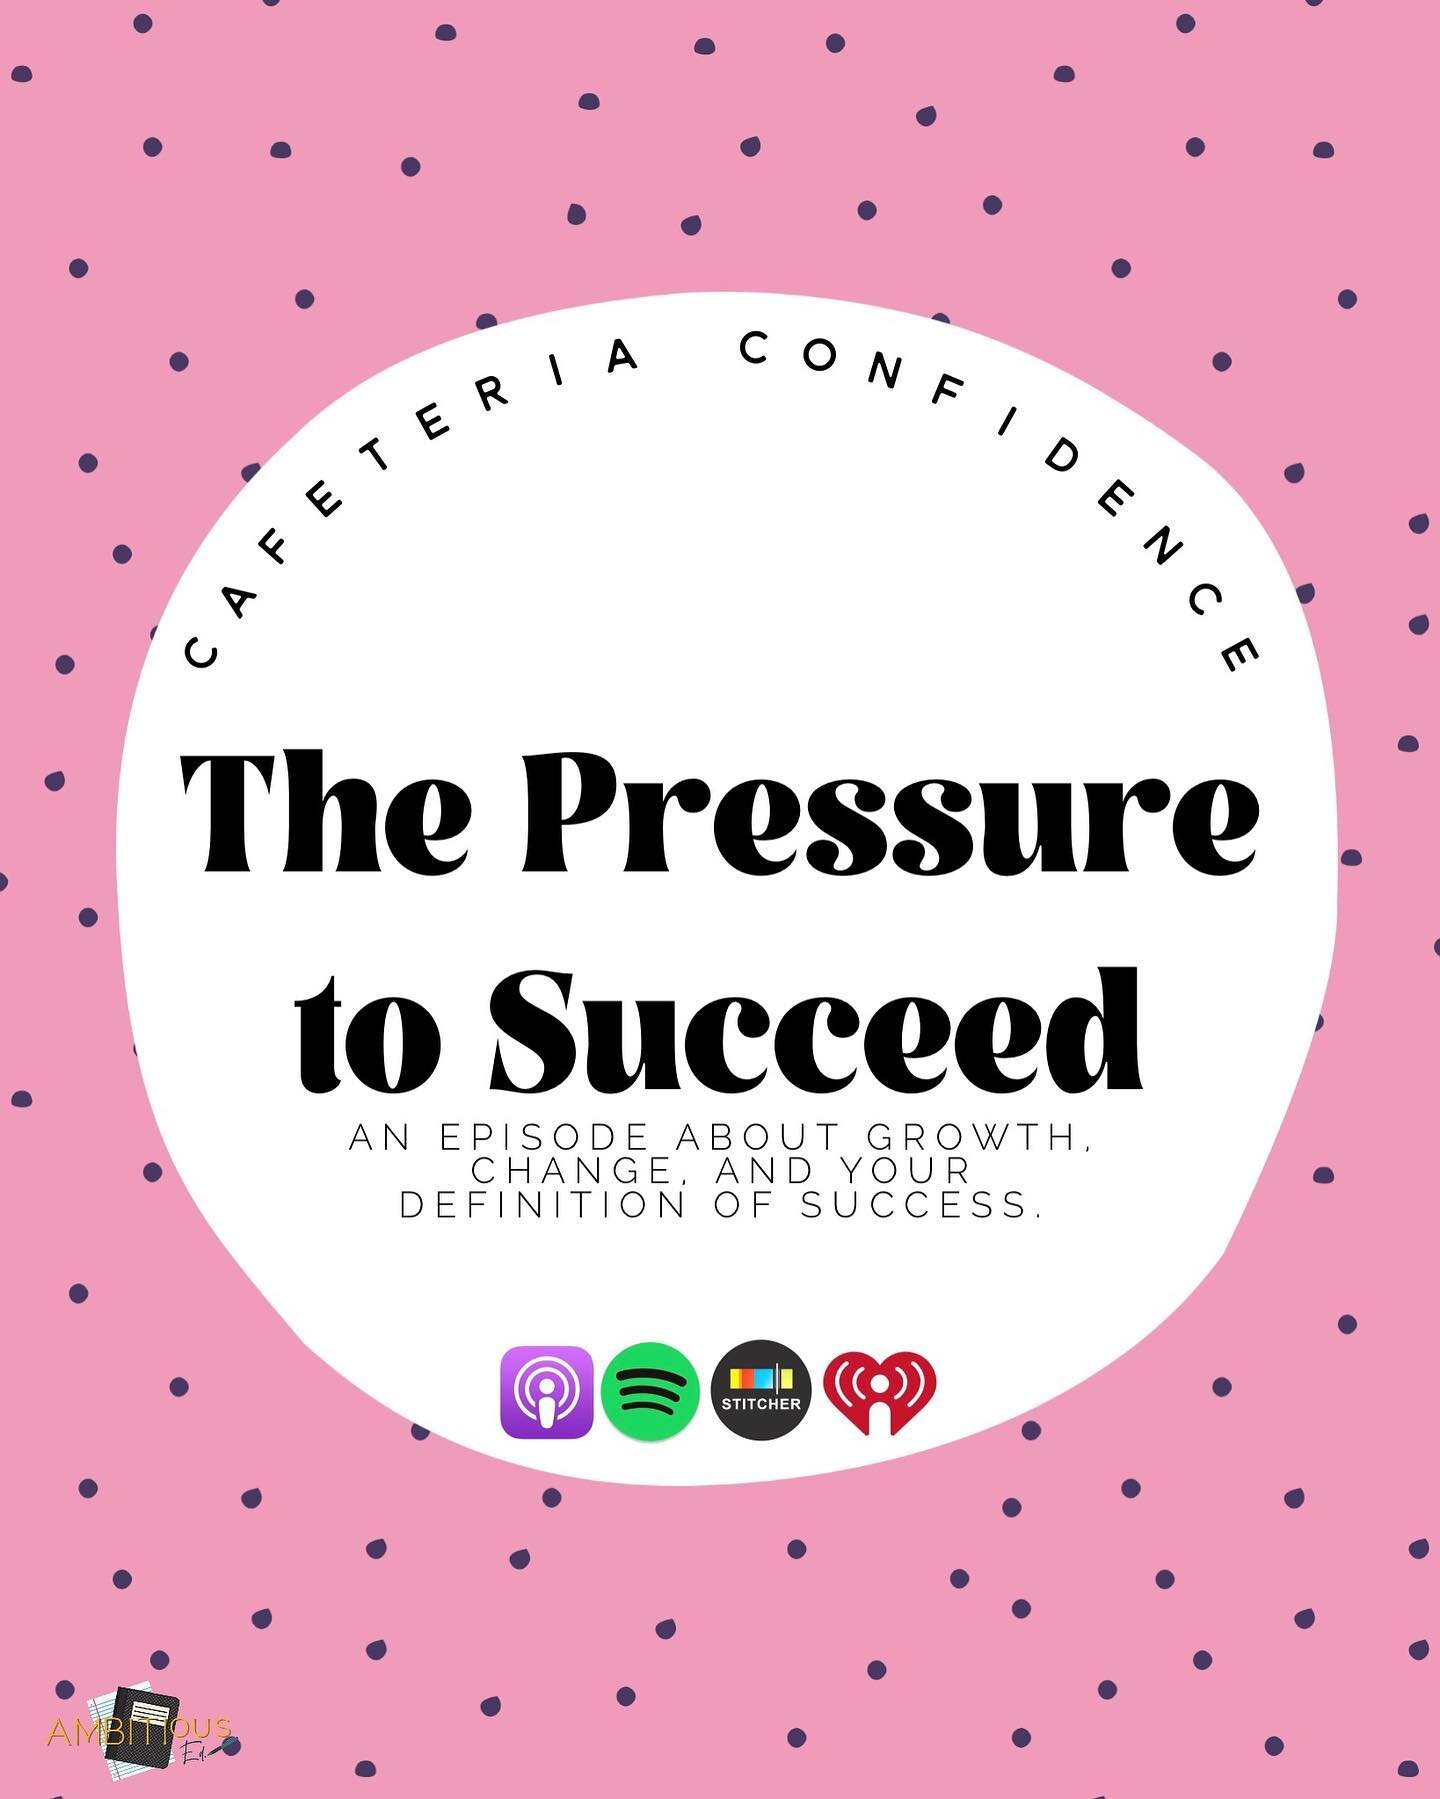 Meagan and Lauren know all about feeling pressured to be the best AND how hard that is to deal with. 

In this episode we&rsquo;ll discuss how to be better prepared to handle that pressure. 

We hope you come away with the tools to shift your mindset